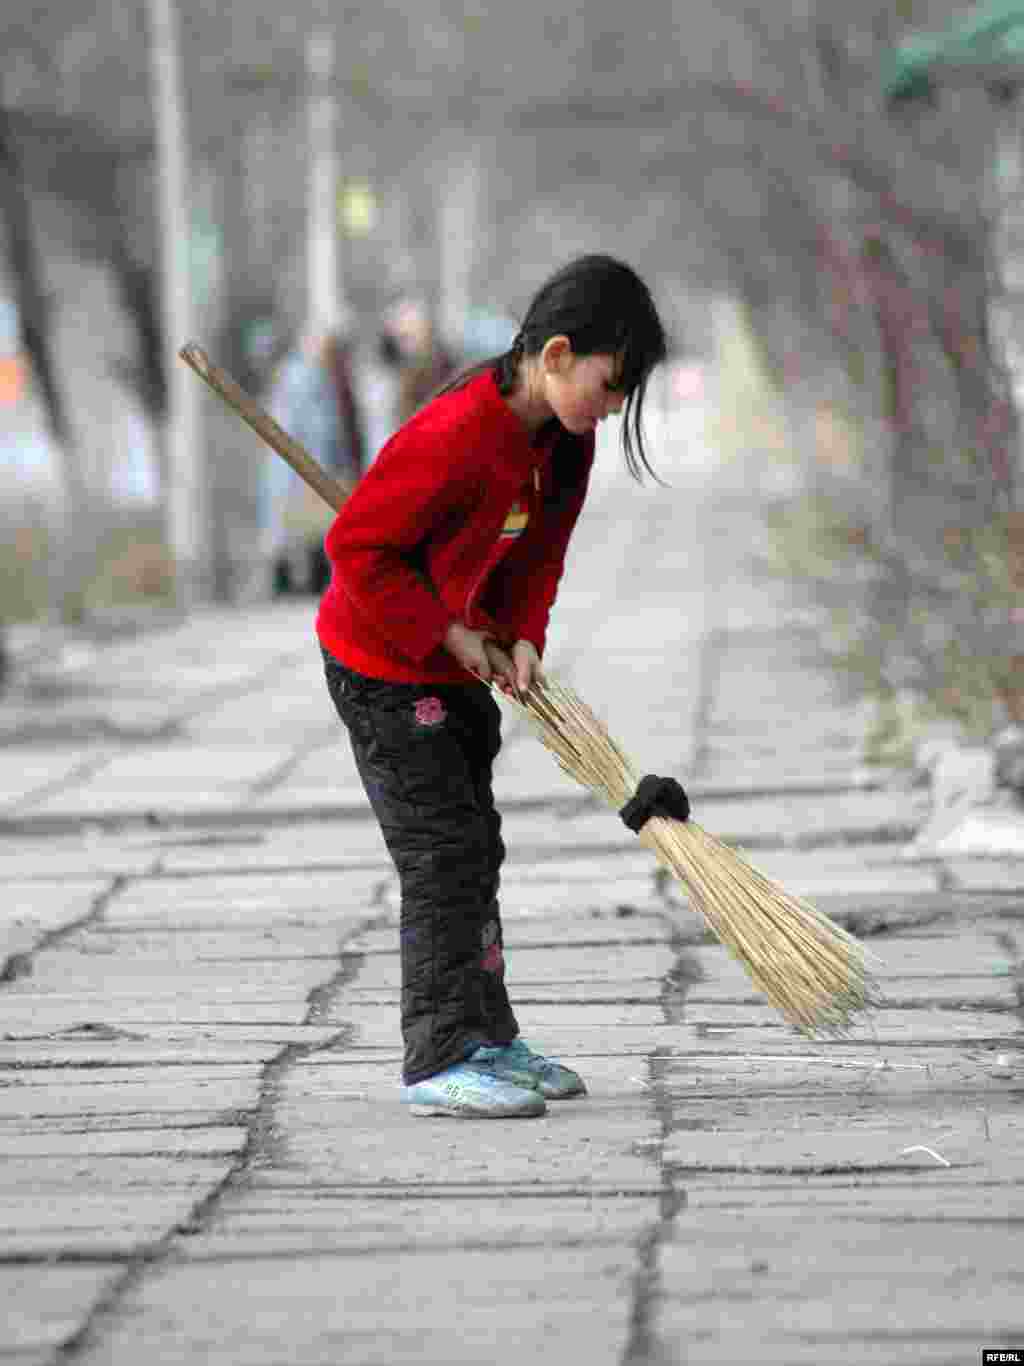 A girl sweeps sidewalks in Kyrgyzstan (RFE/RL) - Seventy percent of all working children -- some 132 million -- work in agriculture. Agriculture, together with construction and mining, is one of the three most hazardous sectors for workers of any age.